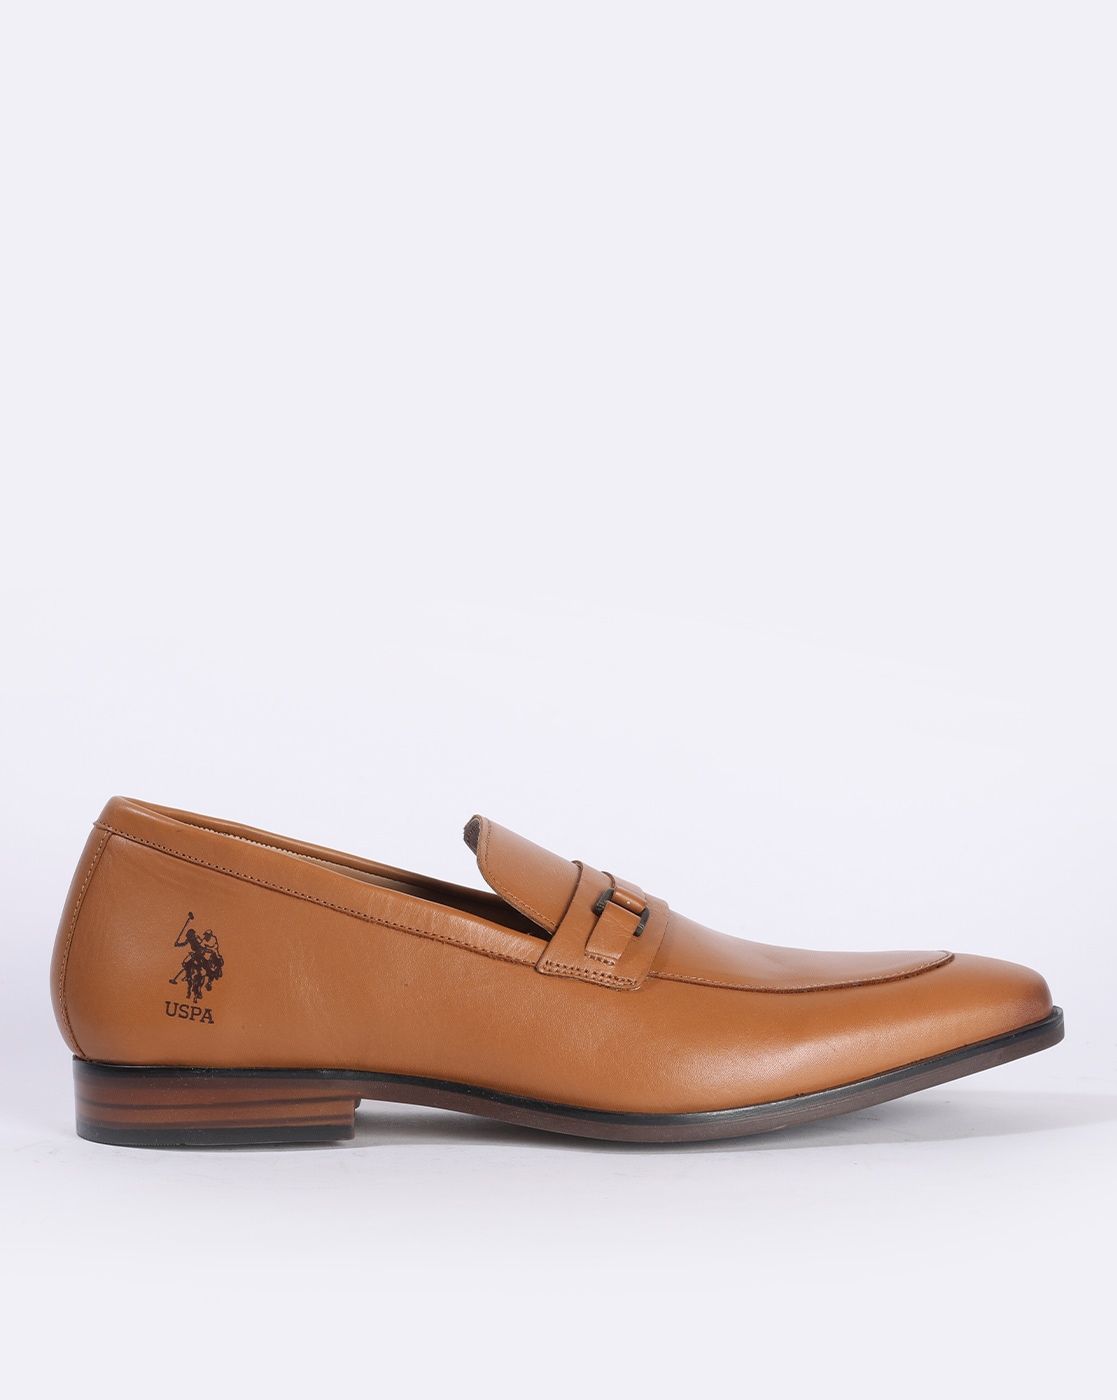 polo formal shoes